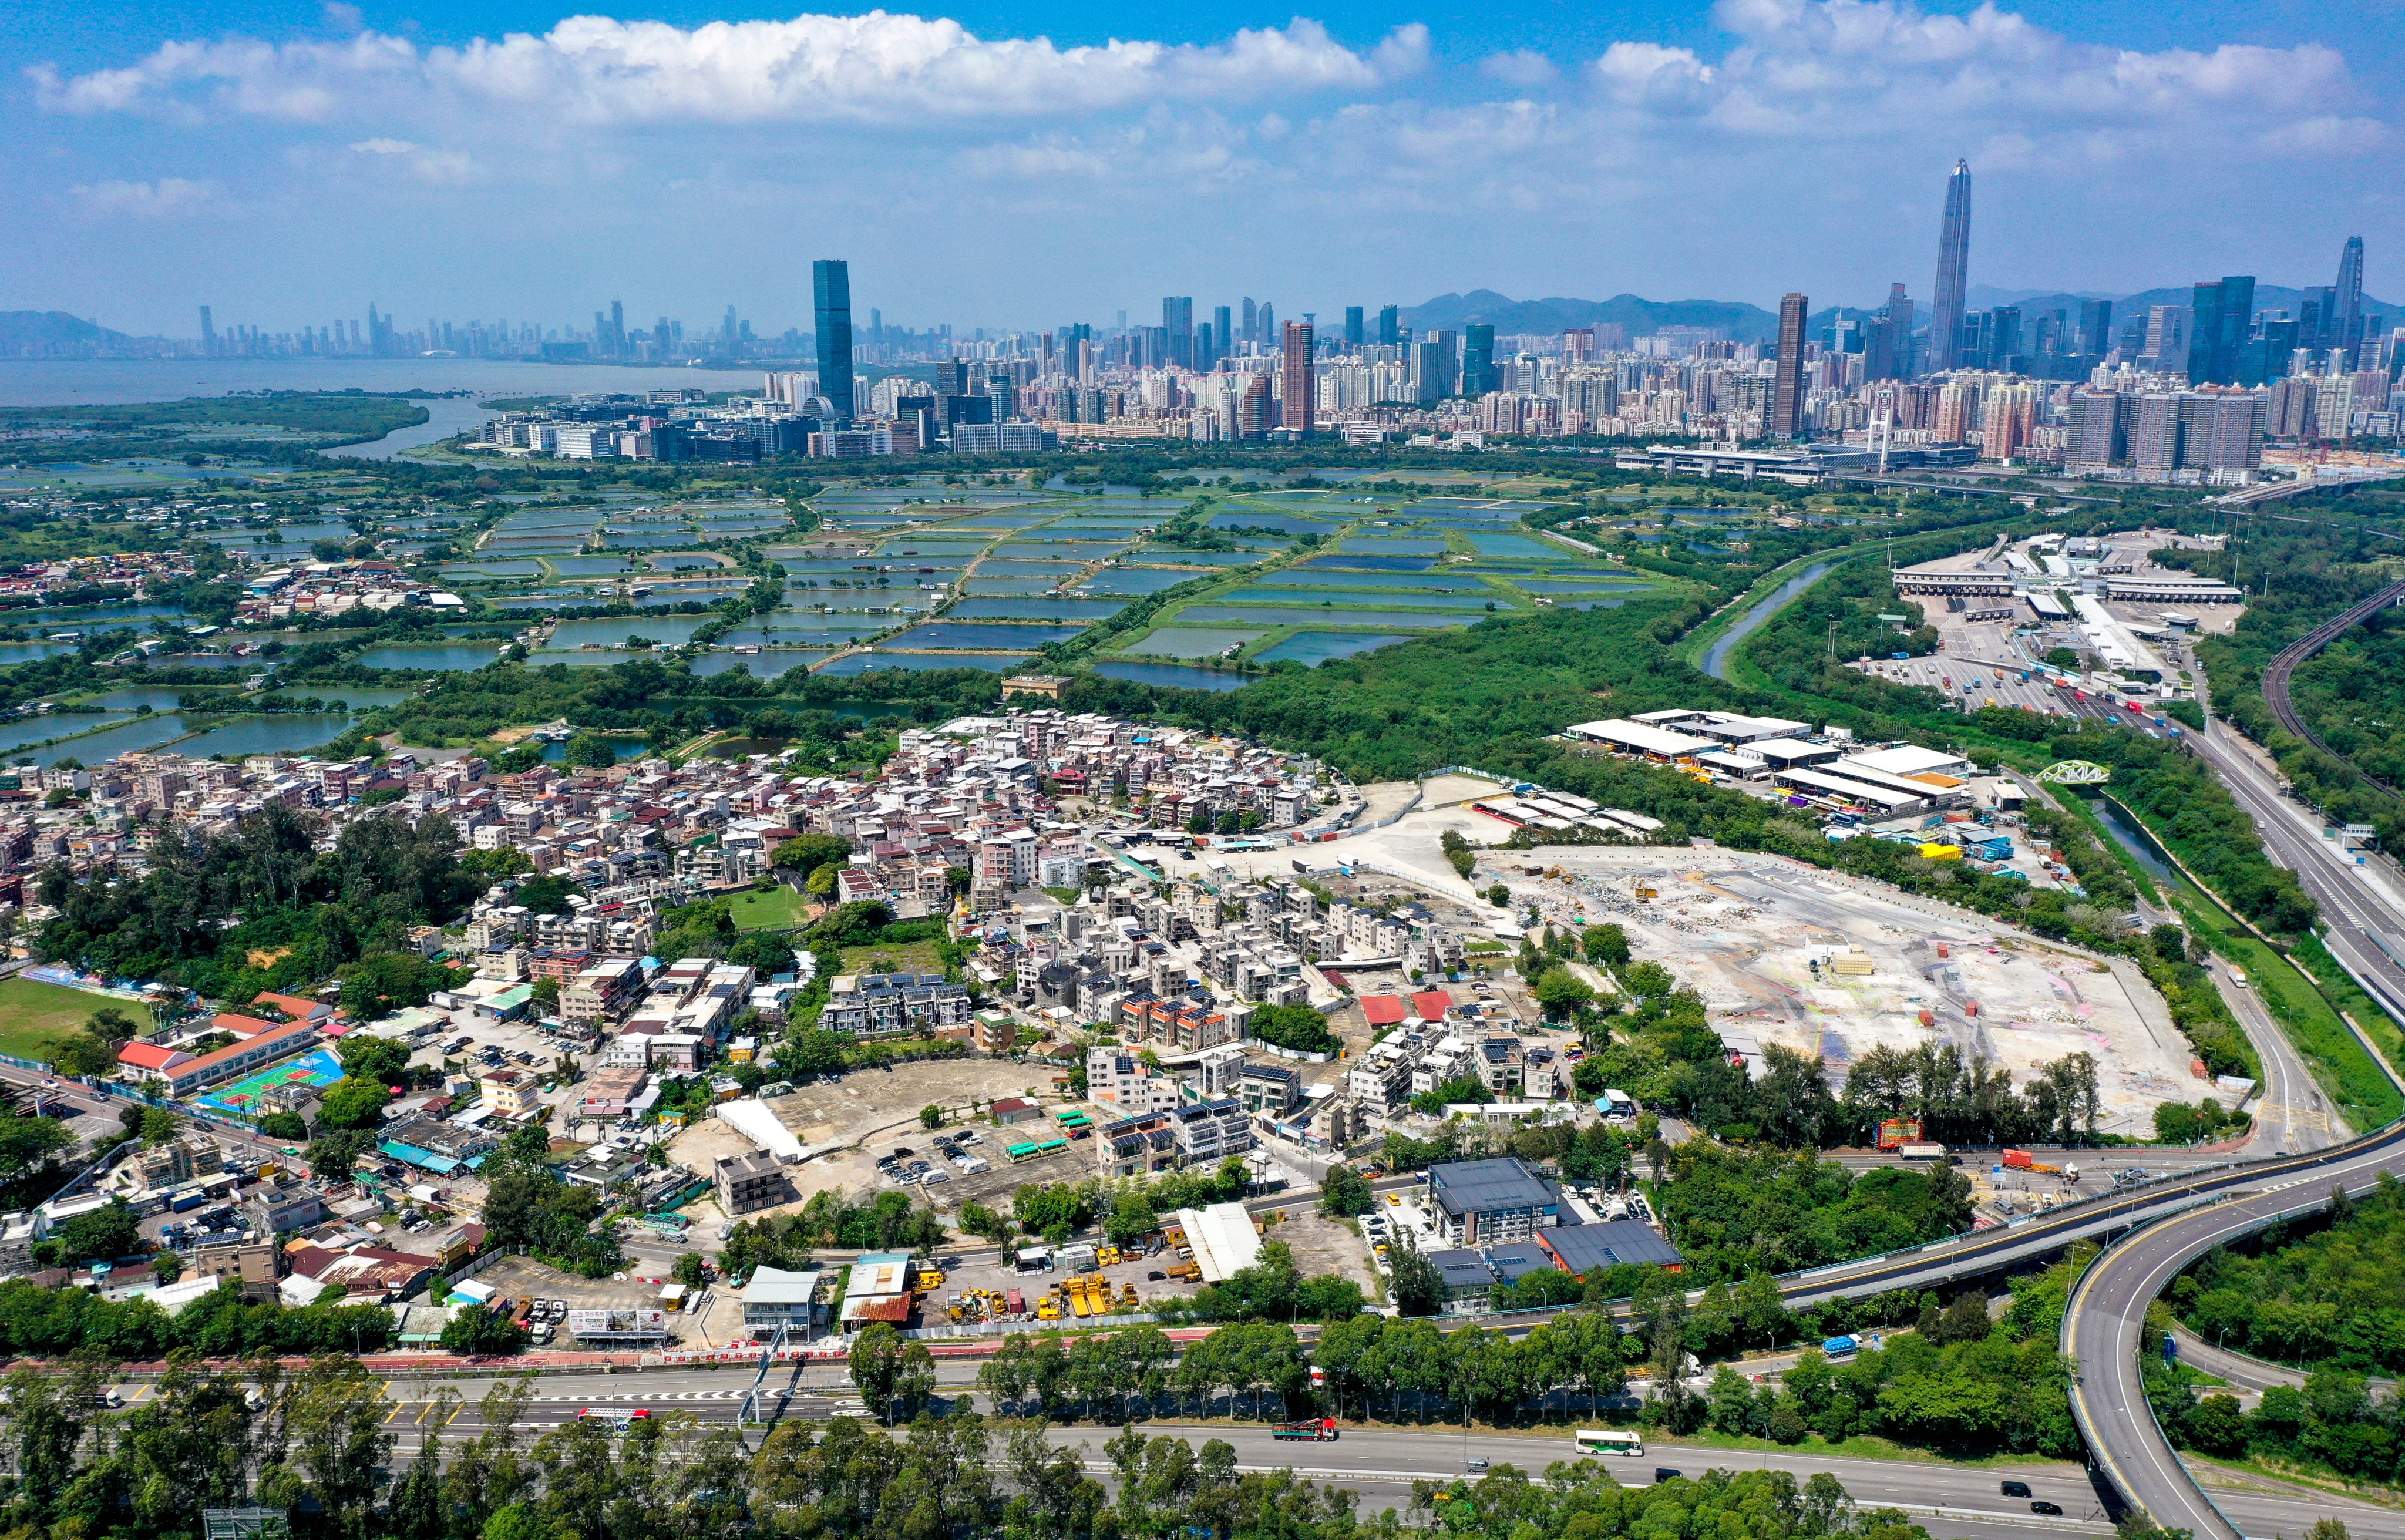 Under the Northern Metropolis plan, the San Tin area of Hong Kong will become a “technopole”. Photo: Winson Wong